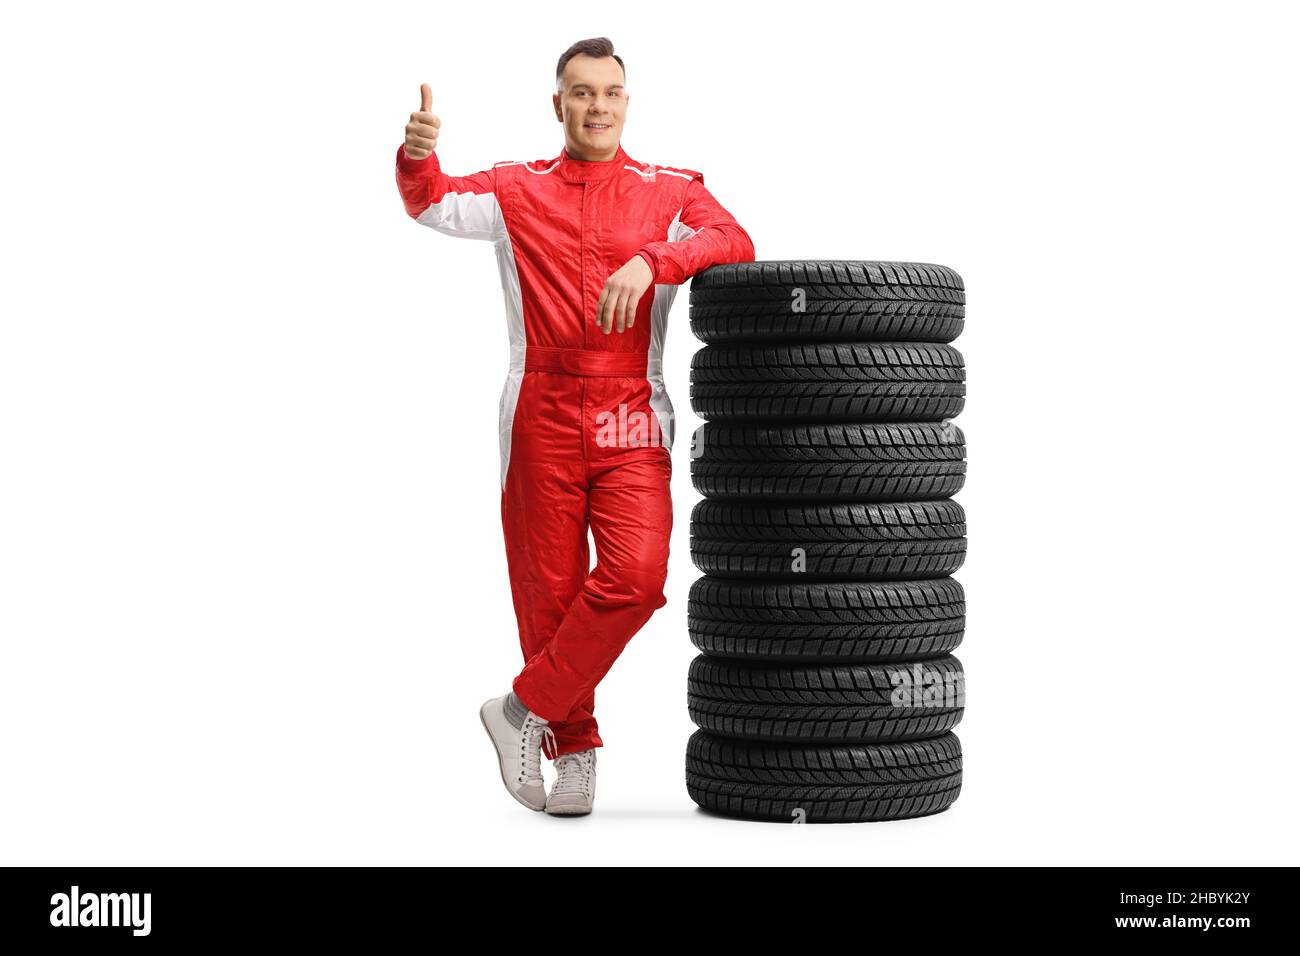 Full length portrait of a racer in a red suit leaning on a pile of tires and showing thumbs up isolated on white background Stock Photo